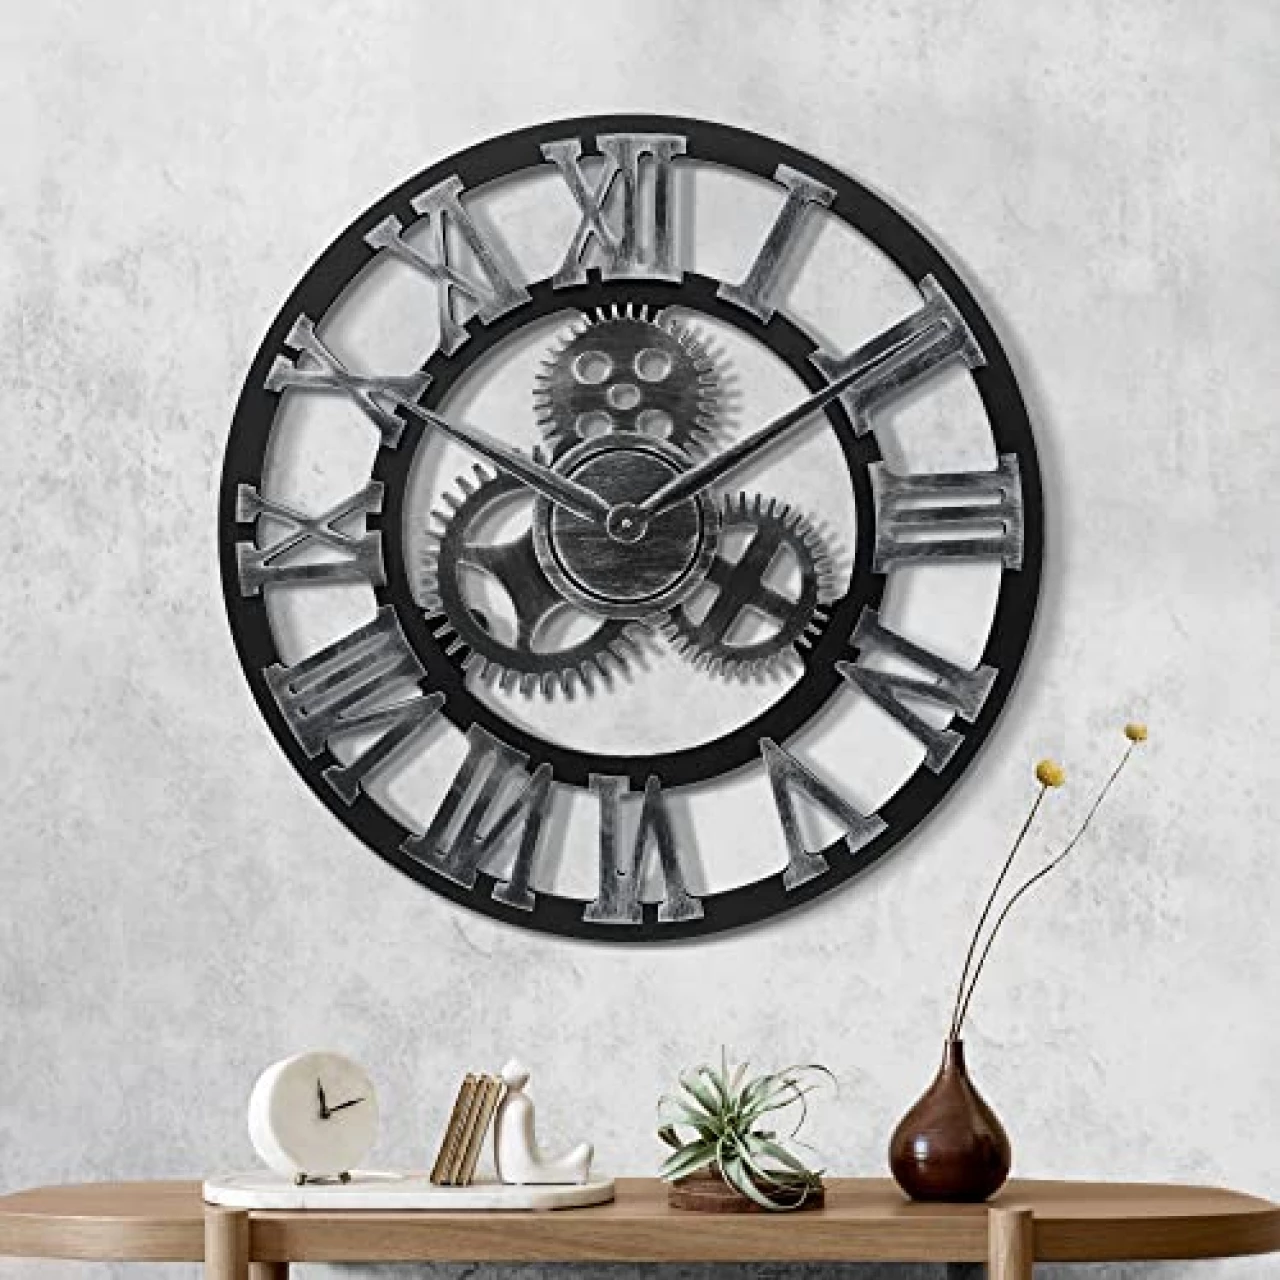 Lafocuse 23 Inch Wooden Gears Wall Clock Silver,Large Wall Clock Oversized Vintage Rustic Farmhouse Industrial Clocks for Living Room Decor